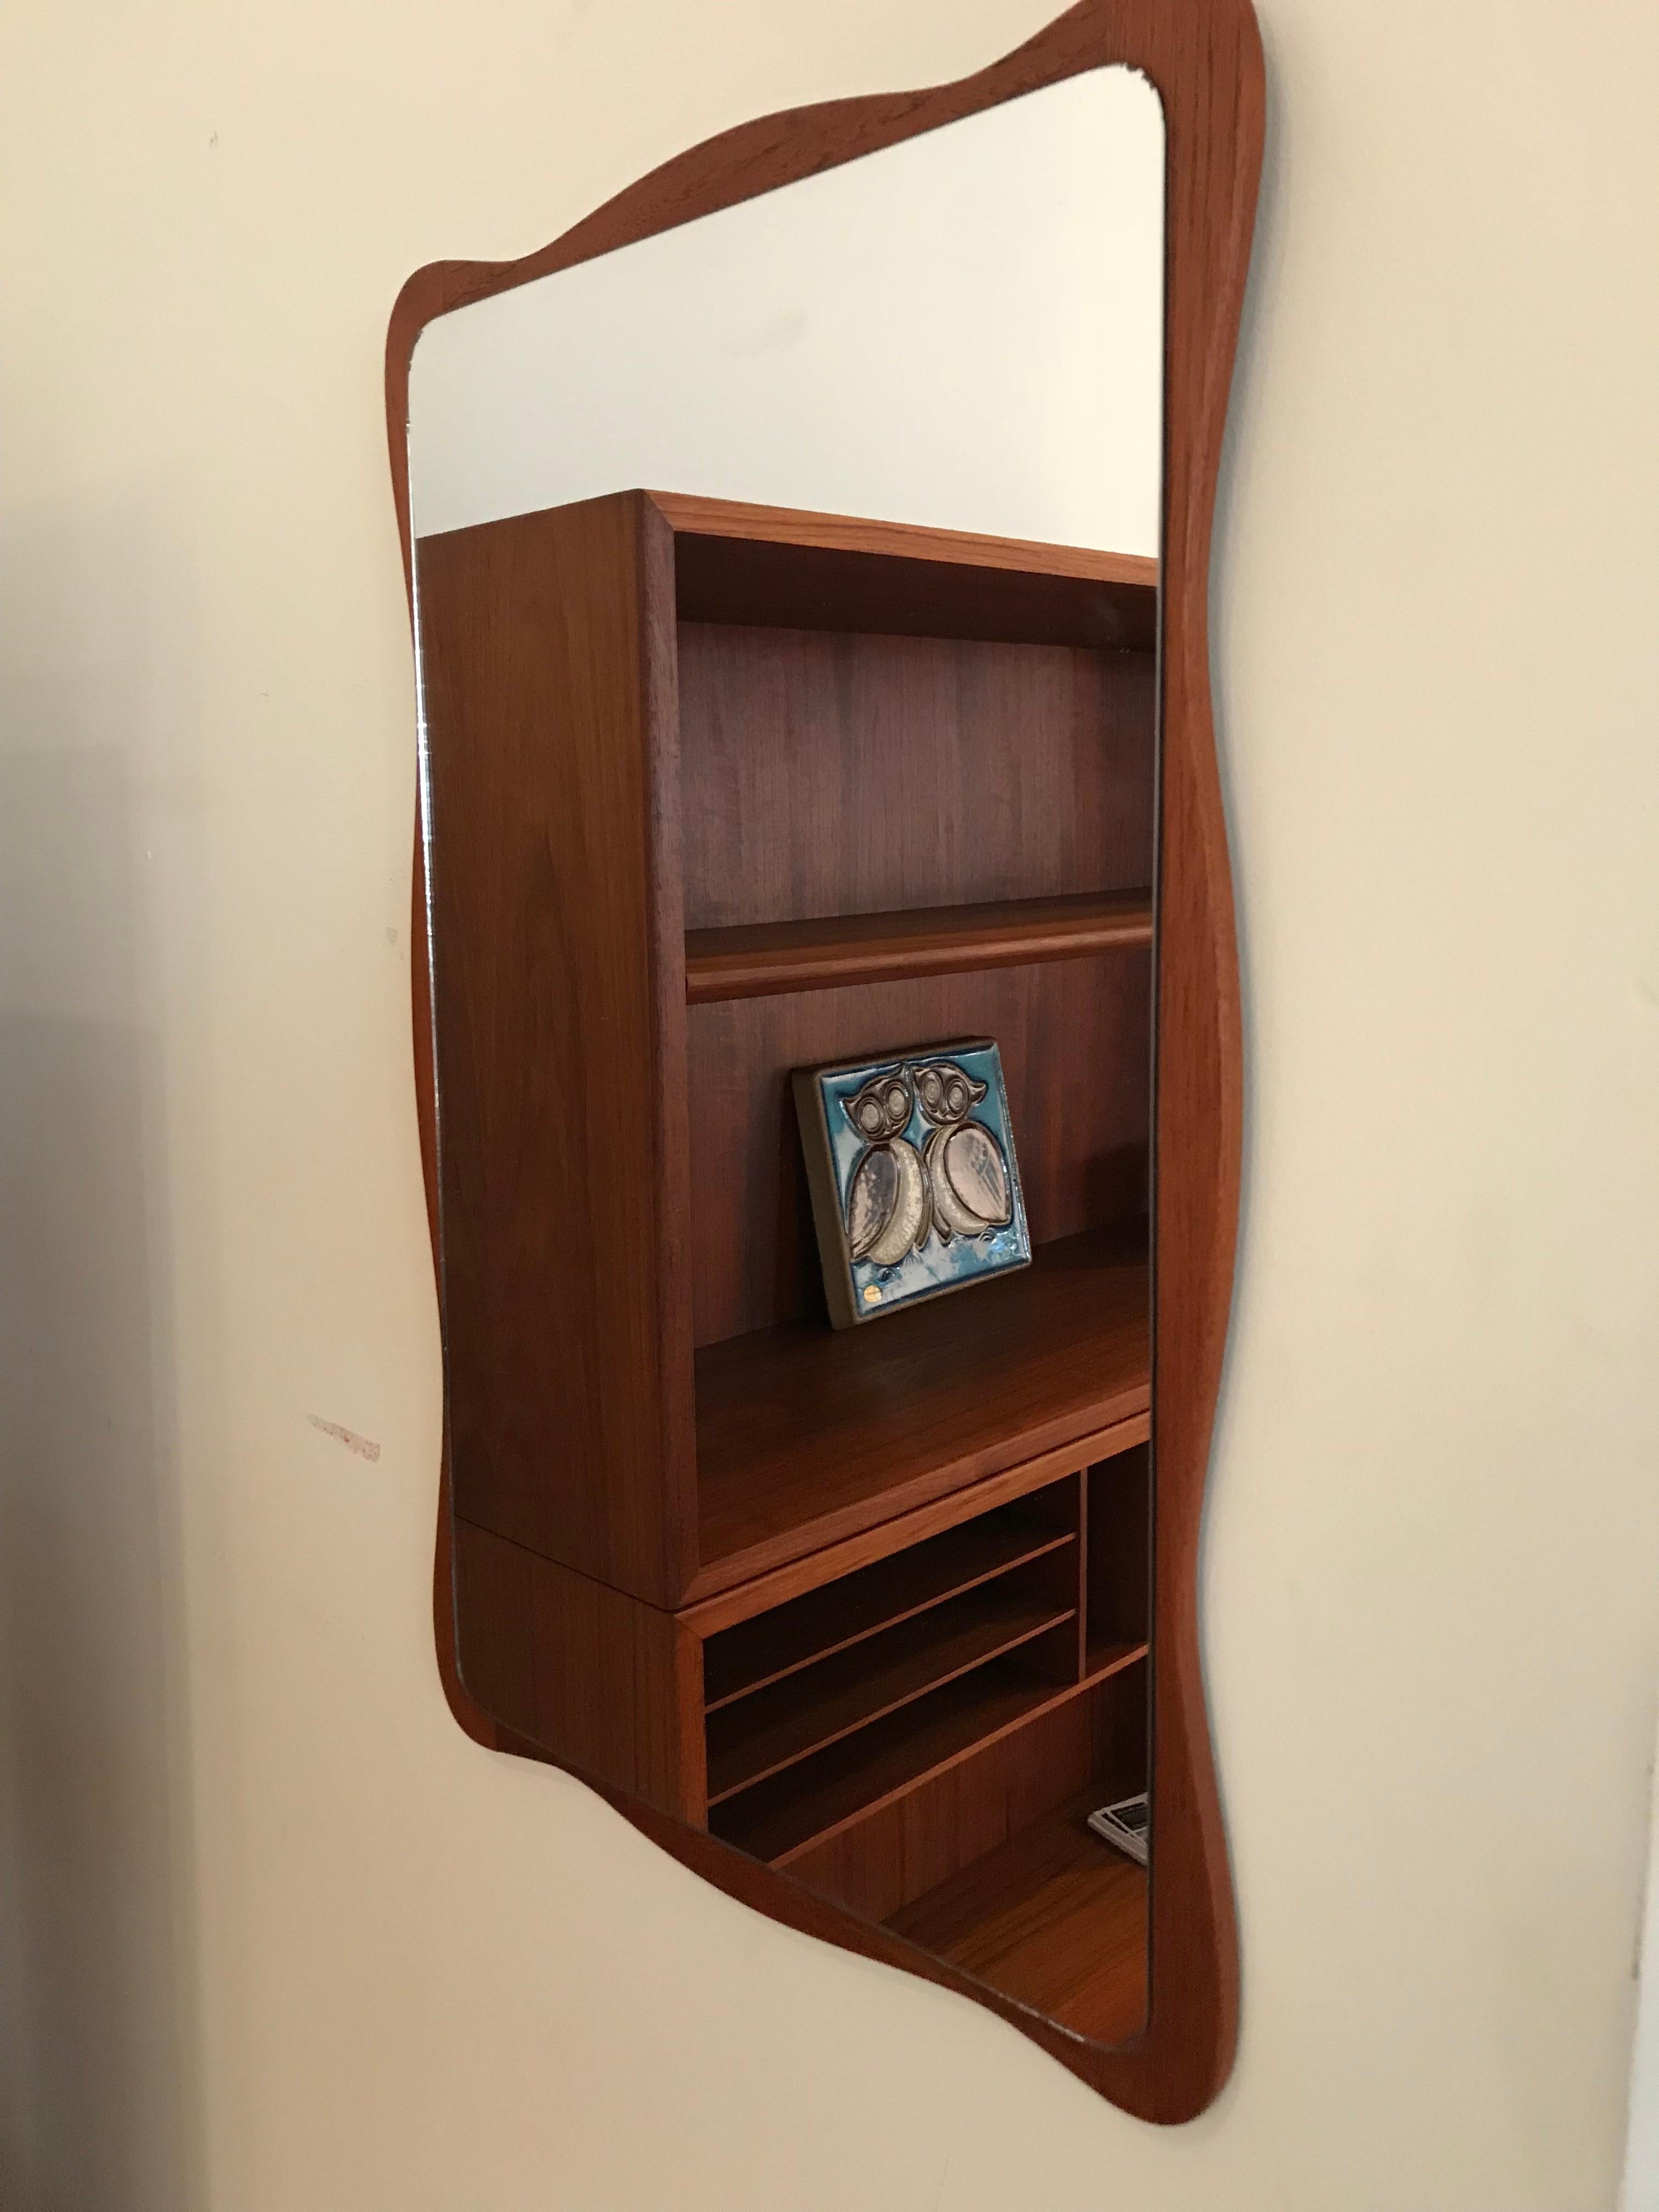 Unusual wavy edged midcentury teak mirror. Would look great in a hallway or a above a side table.